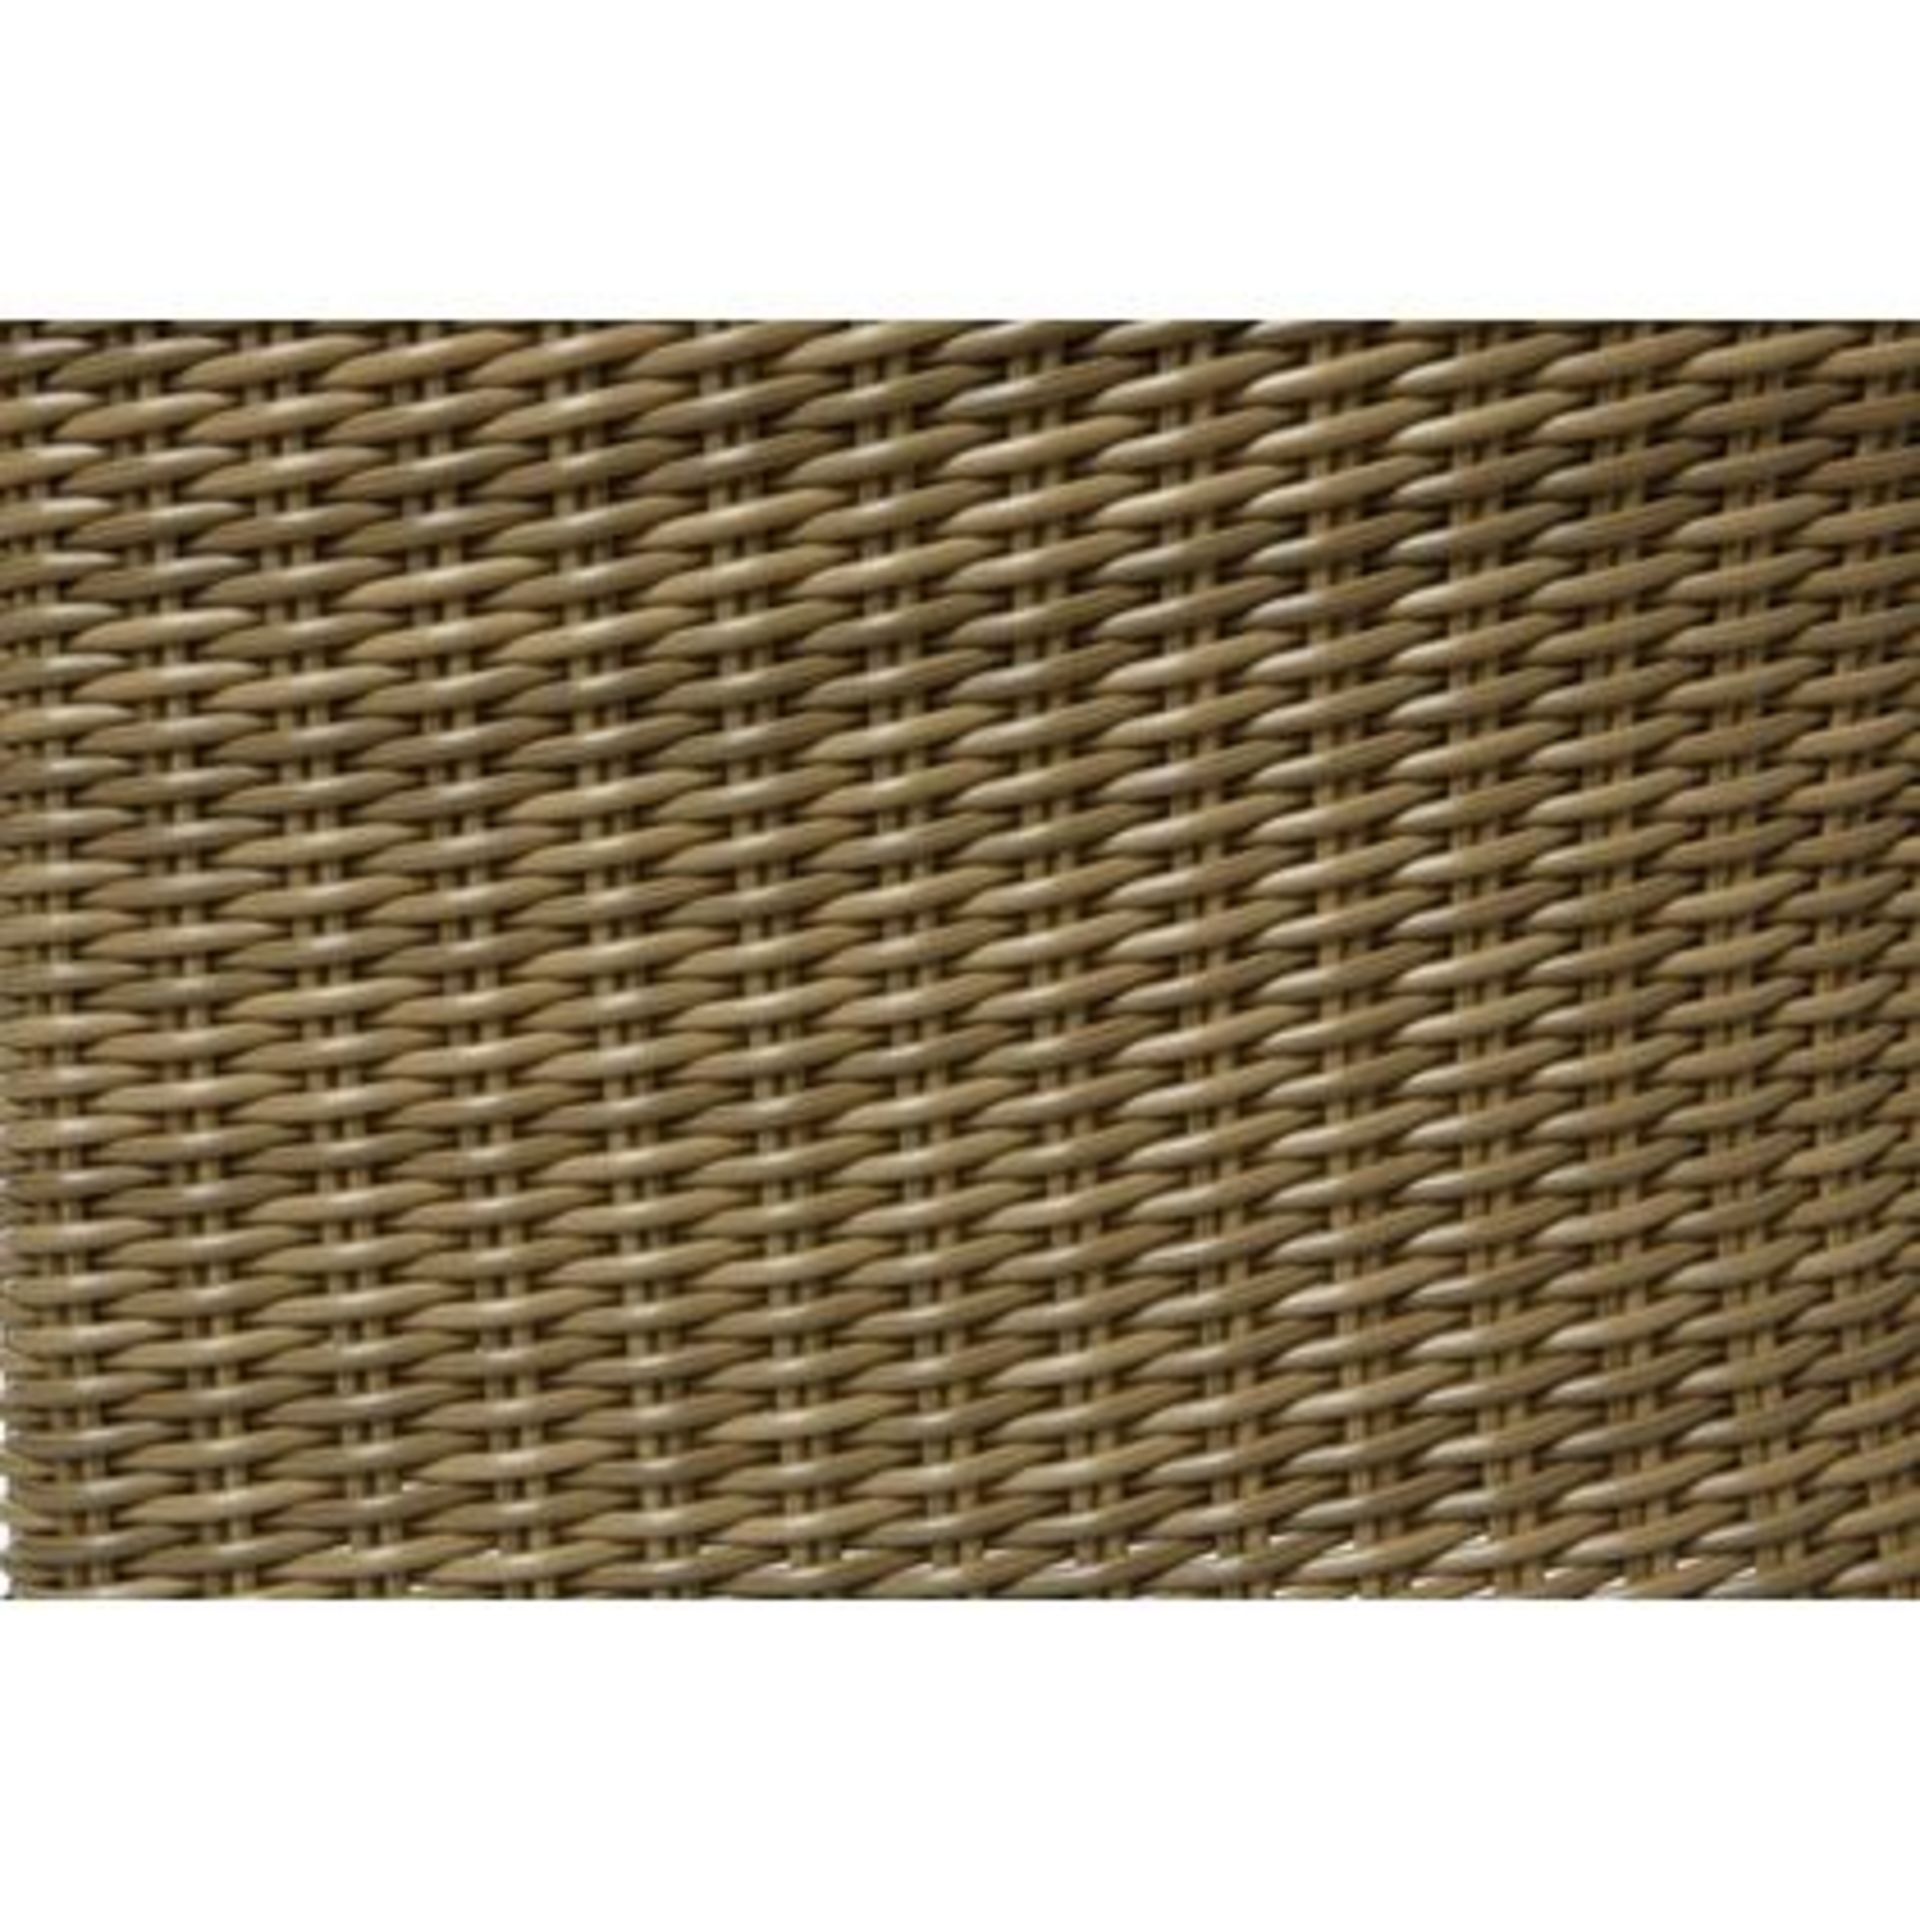 1 x New Worcester 4 Seater Rattan Effect Garden Furniture Set. RRP £599.99. ade from hand woven - Image 5 of 5